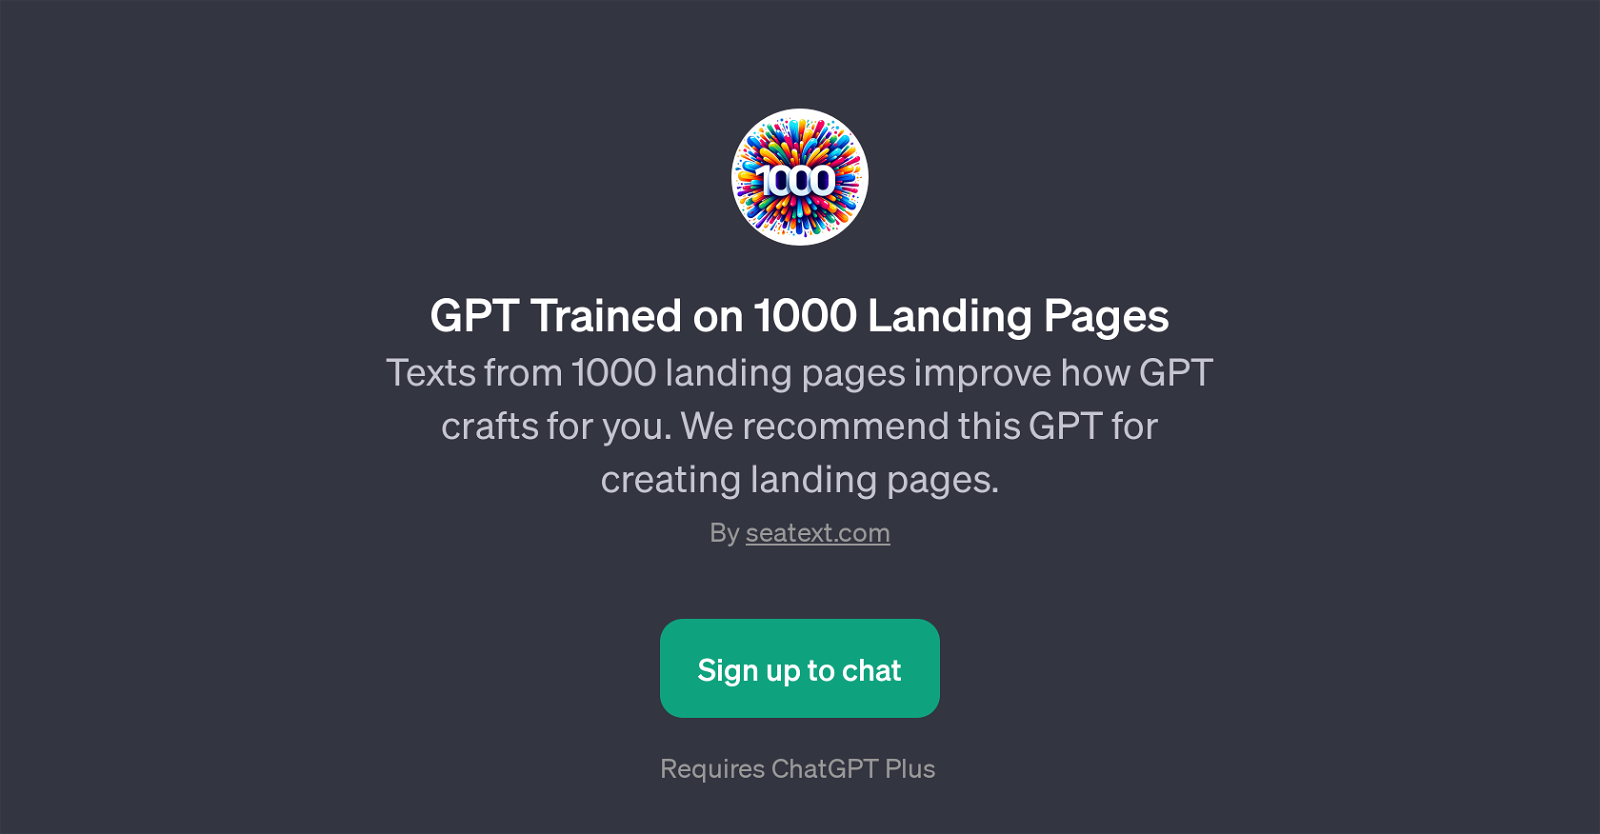 GPT Trained on 1000 Landing Pages website